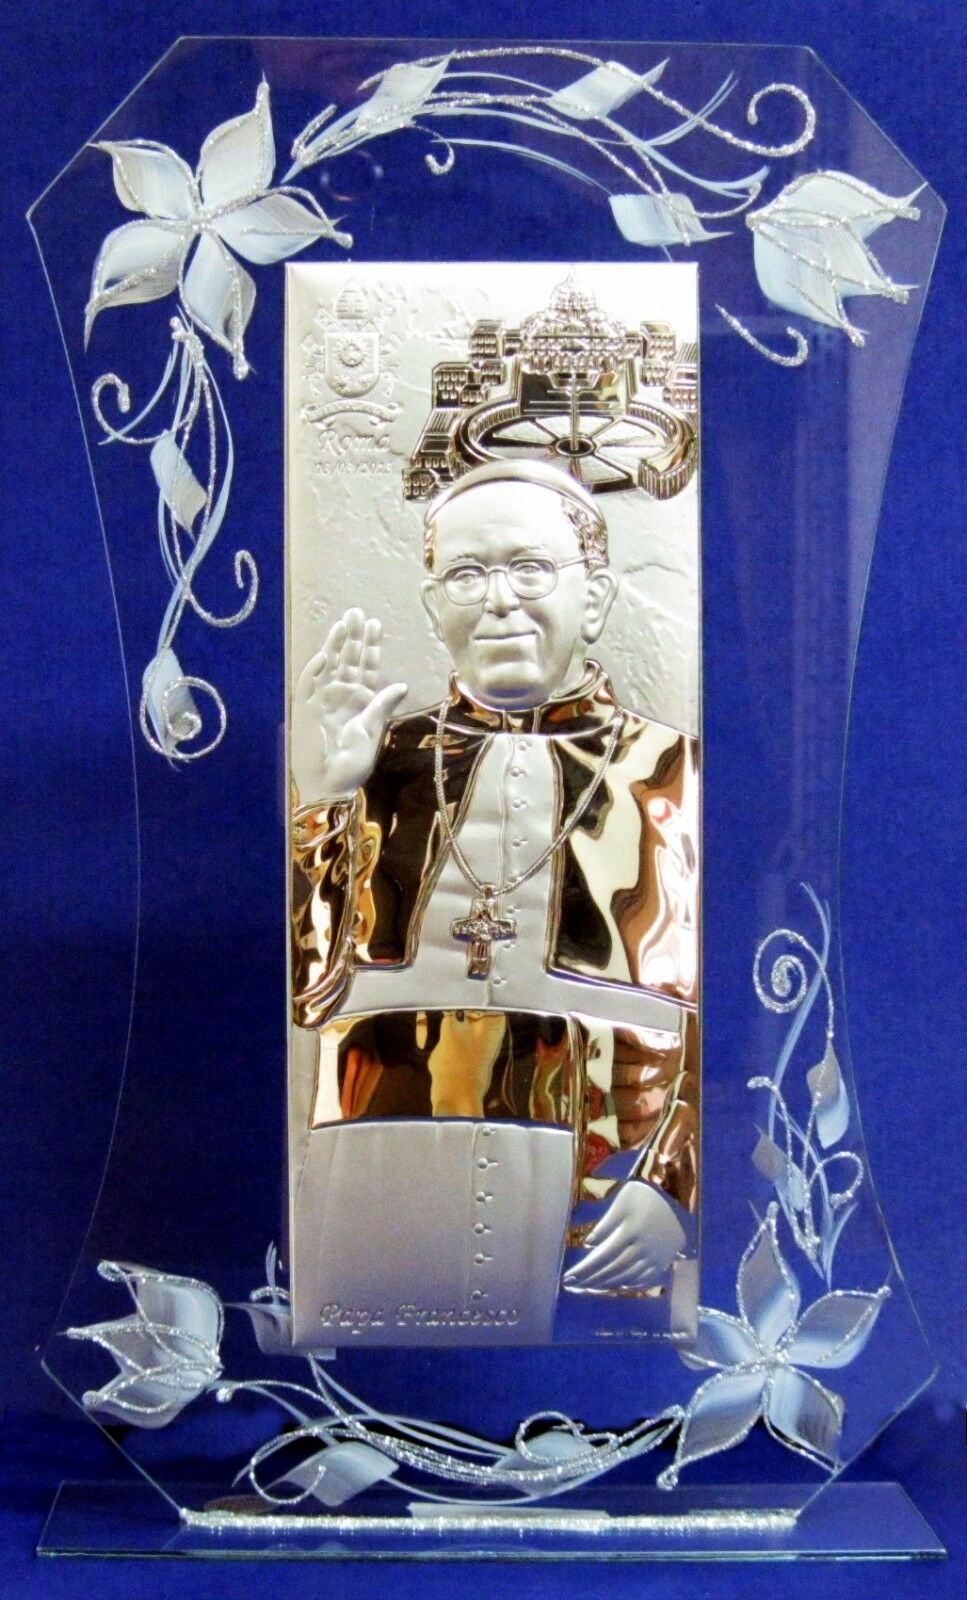 Pictures Glass Saint Pio Decoro Silver And Gold Laminated Plates Price For 10 Pieces 